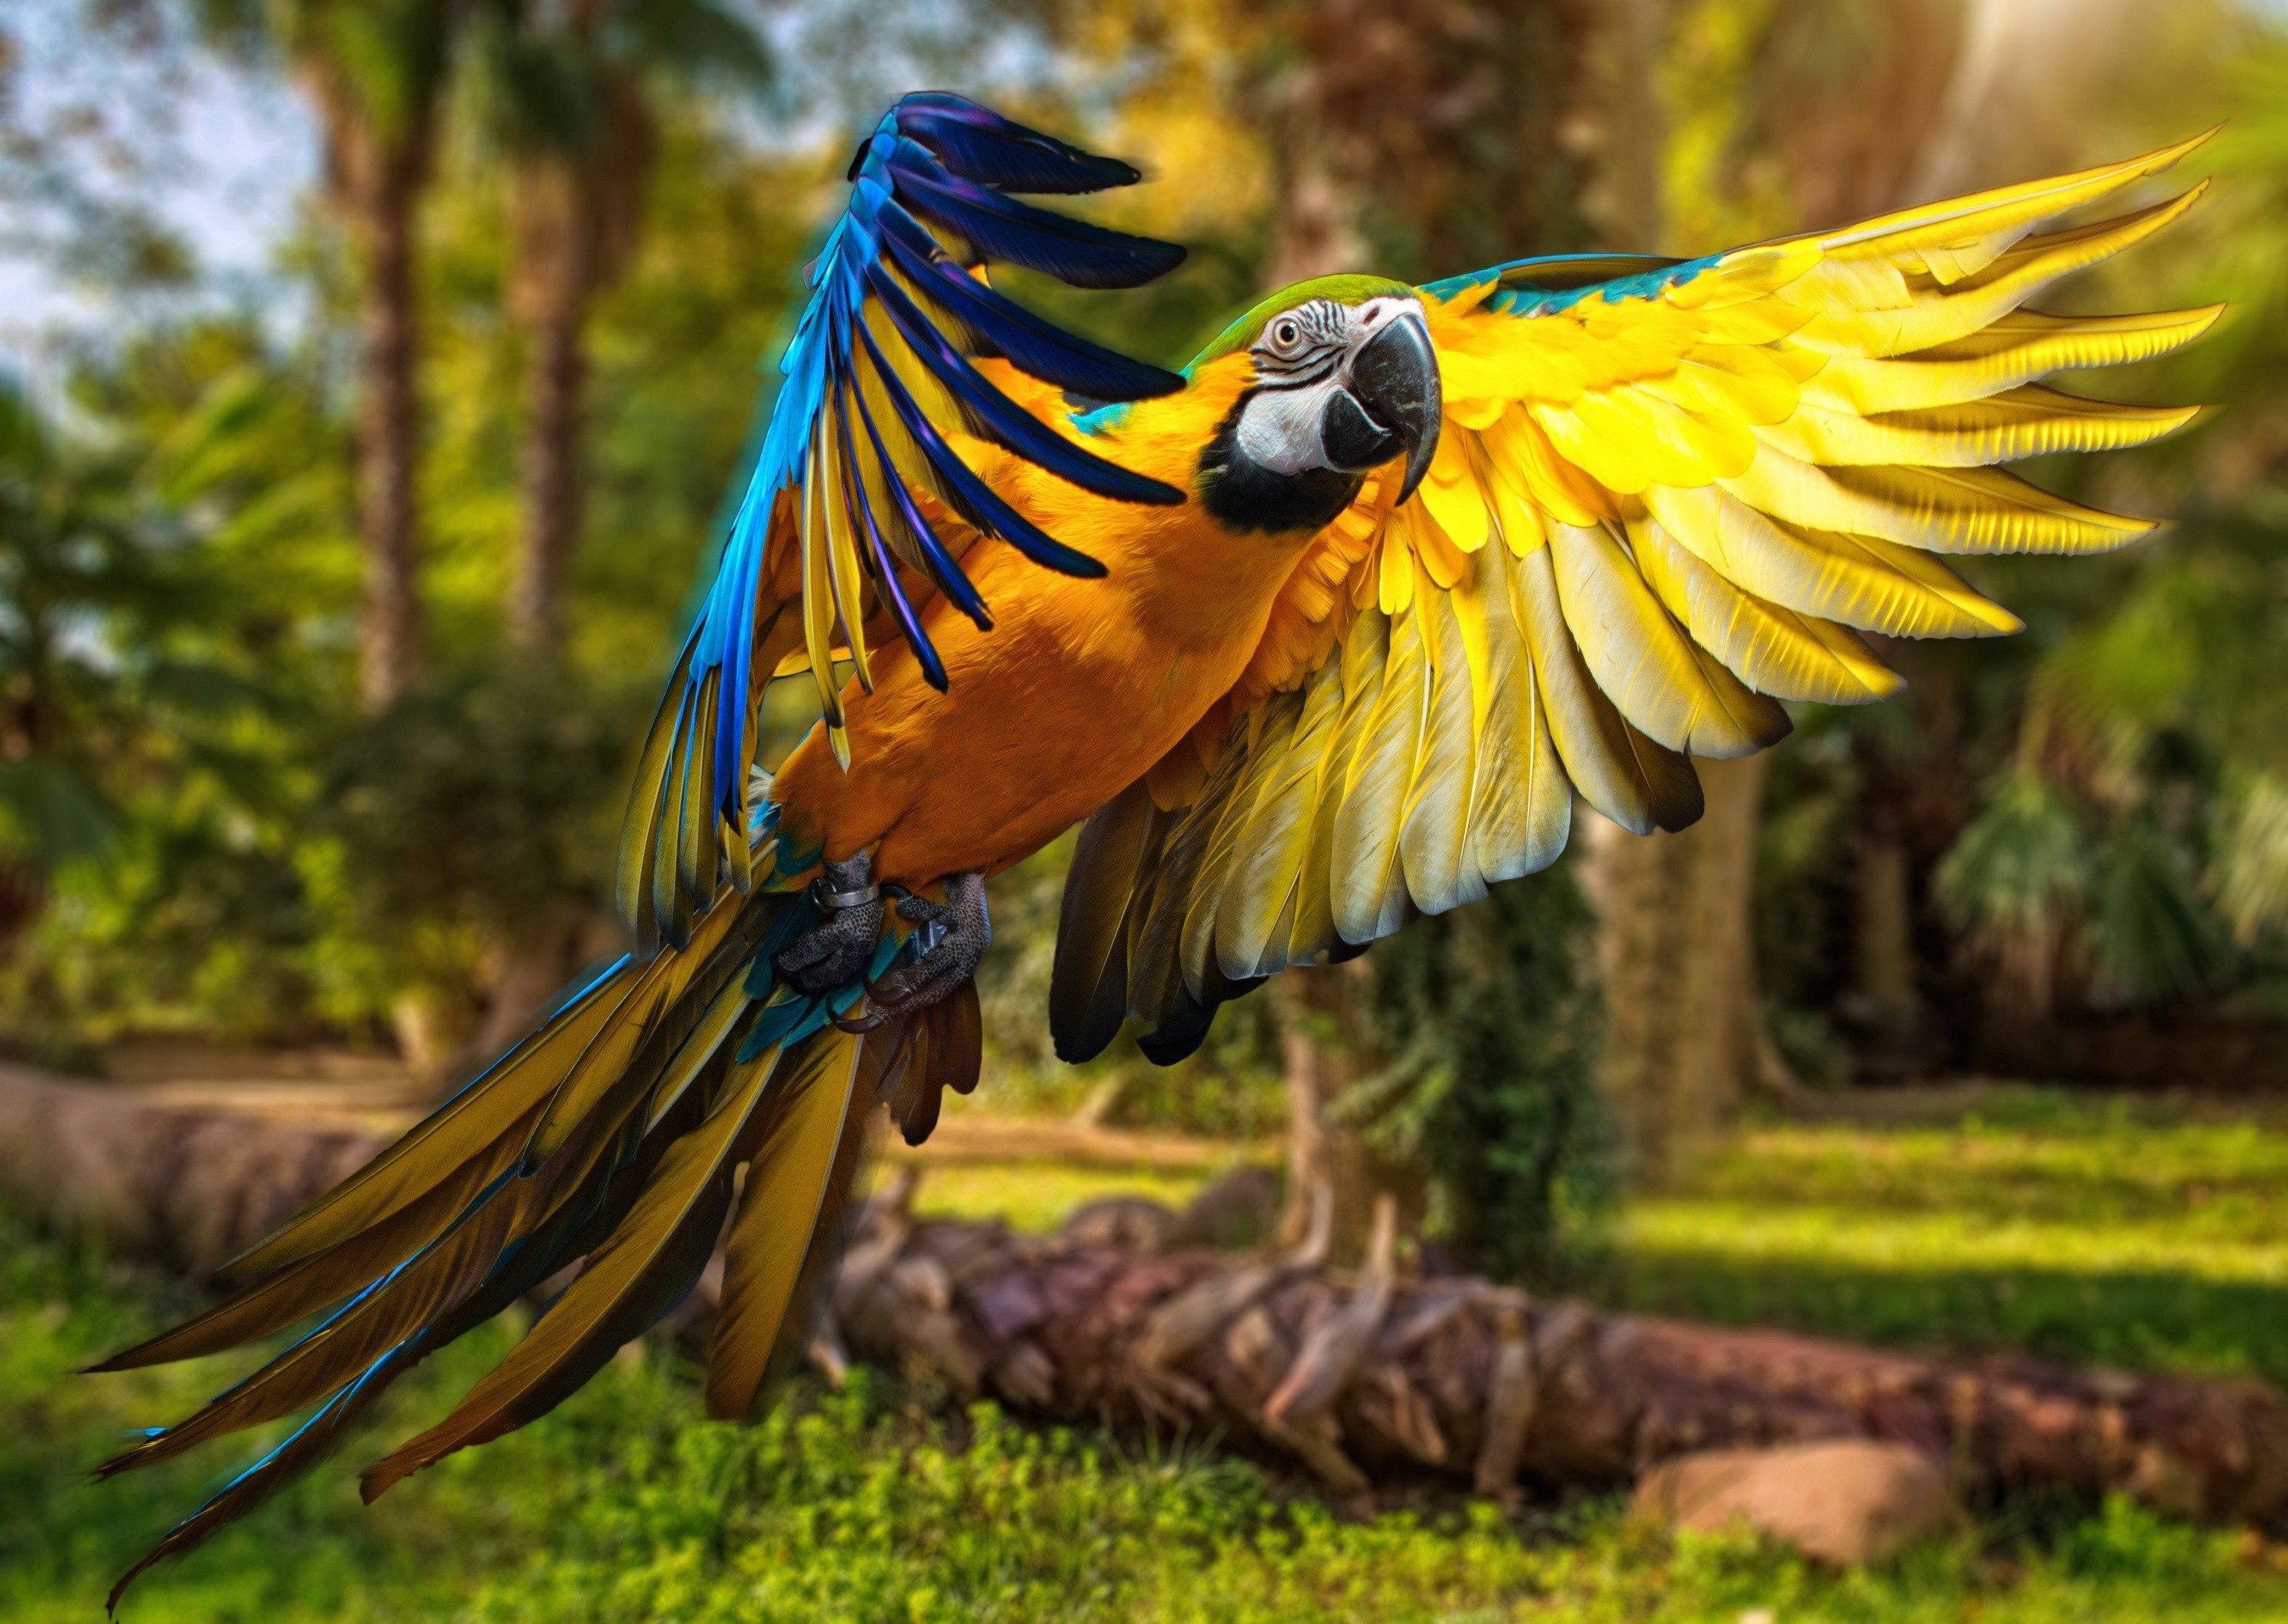 macaw, flight, parrot, animal, blue and yellow macaw, birds